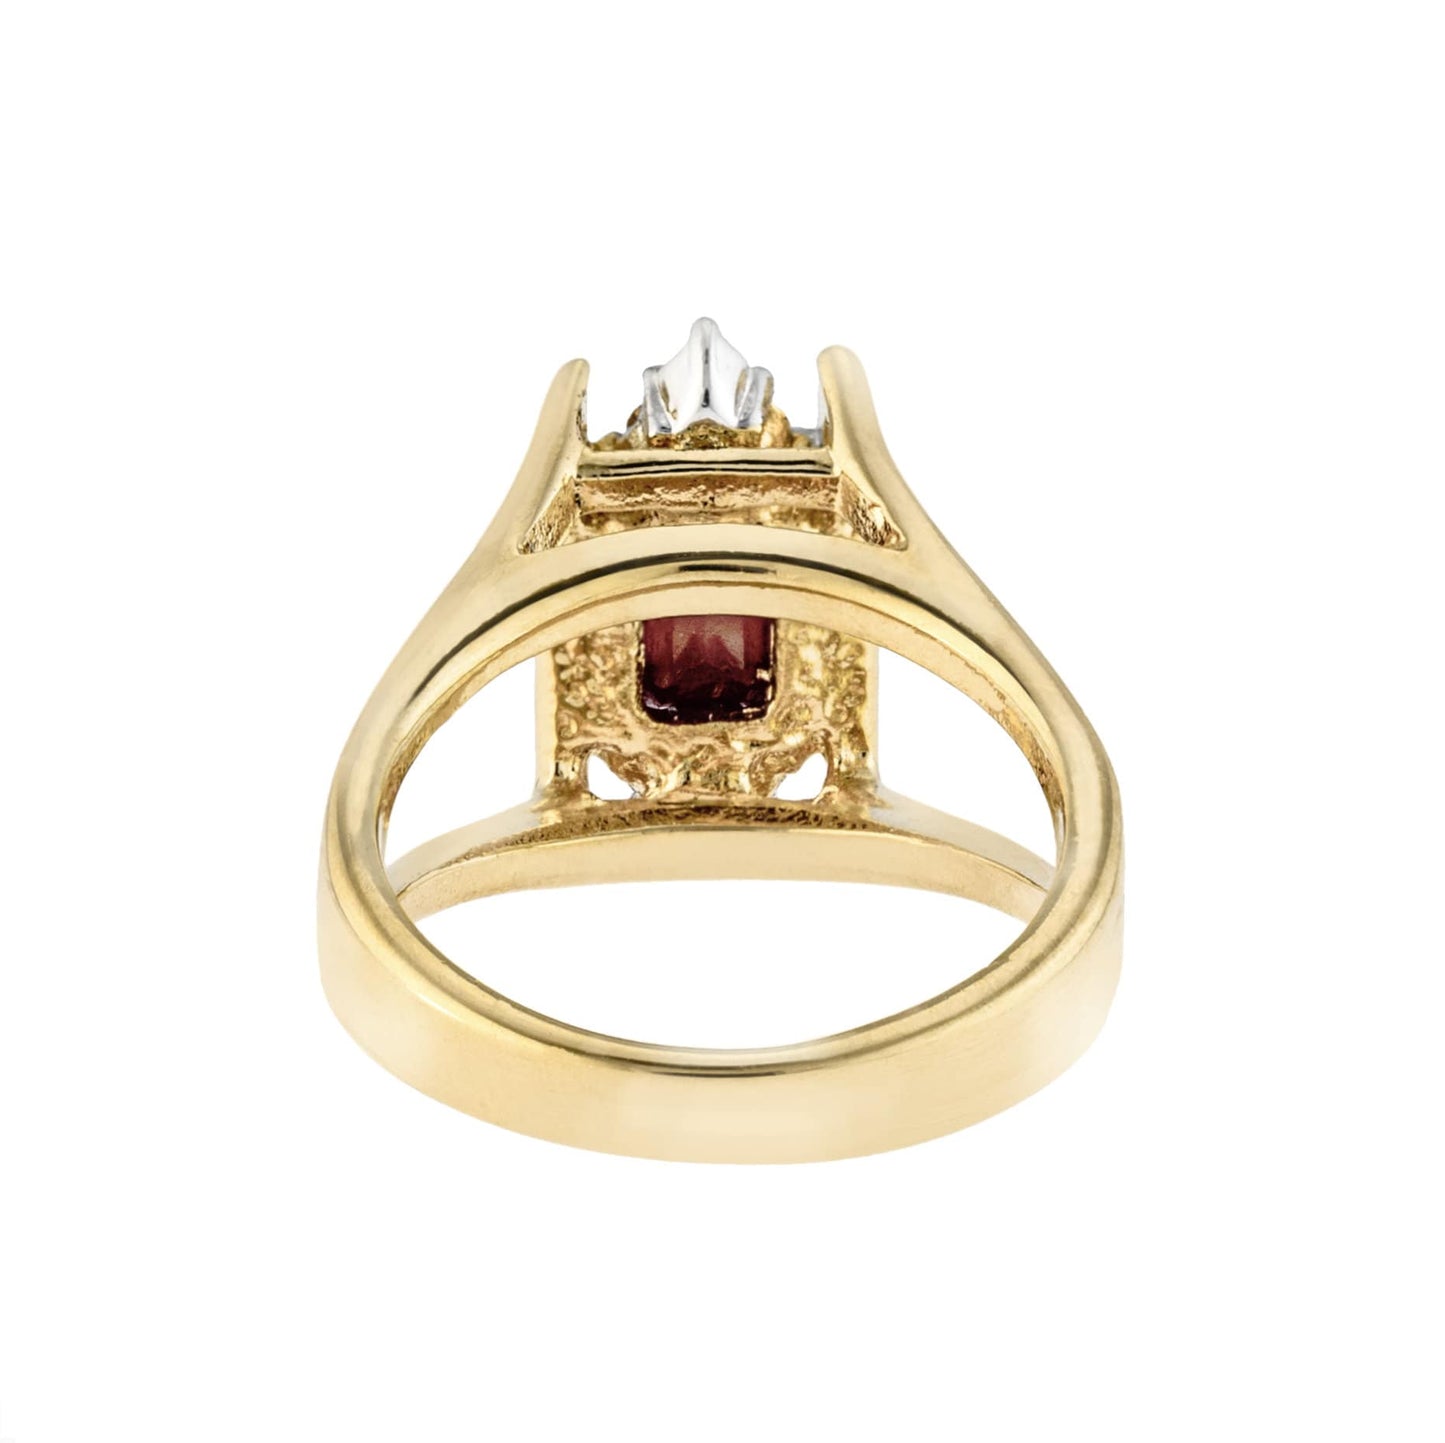 Vintage Ring 1980s Garnet and Clear Swarovski Crystals 18k Gold January Birthstone Womans Antique #R1747